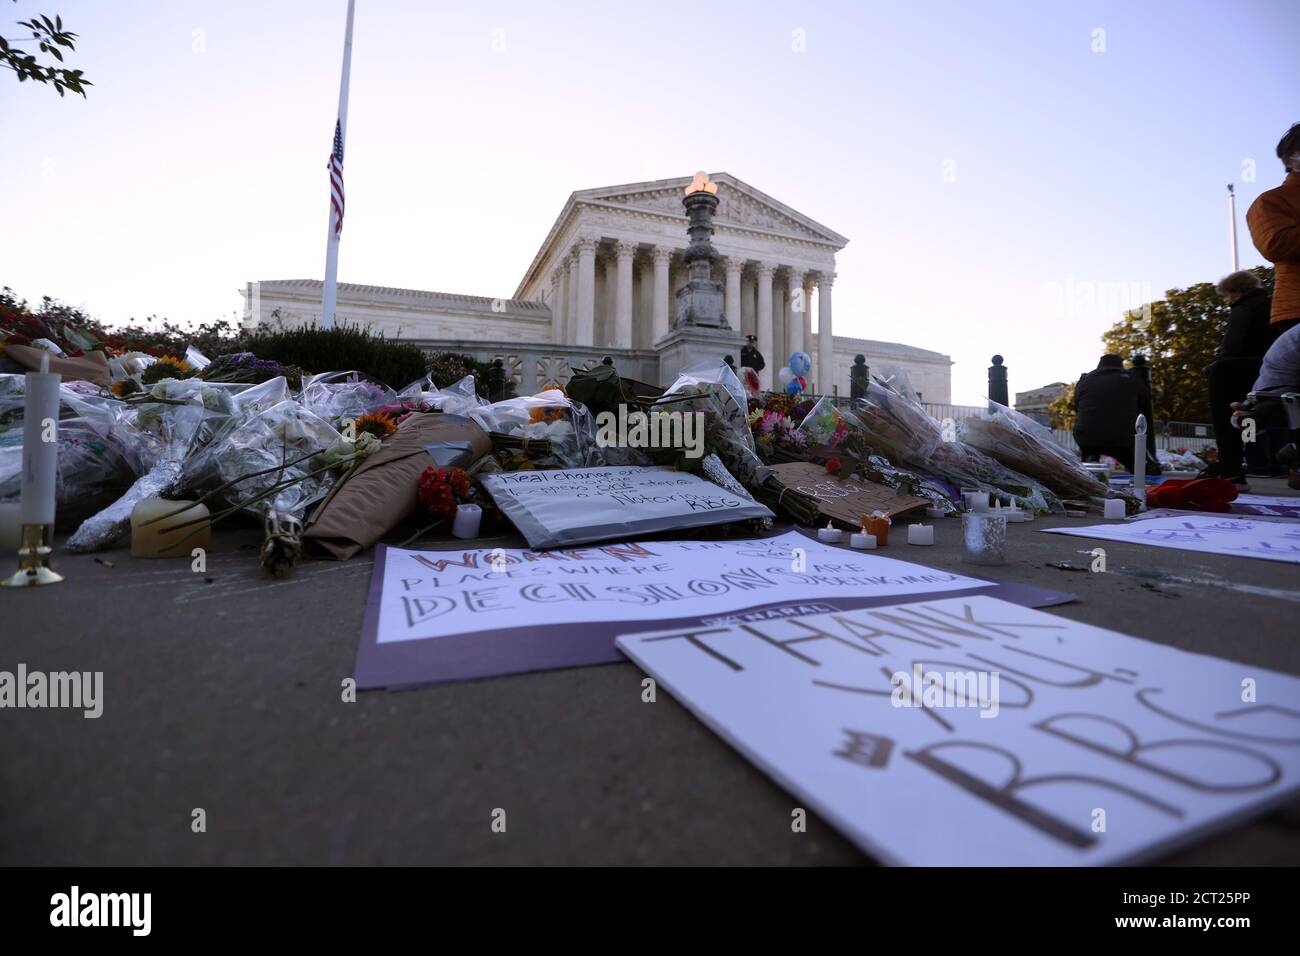 Washington, DC, USA. 20th Sep, 2020. View Of State Supreme Court showered in flowers and signs from mourners who gathered to remember Supreme Court Justice Ruth Bader Ginsburg after her passing in Washington, DC on September 20, 2020. Credit: Mpi34/Media Punch/Alamy Live News Stock Photo